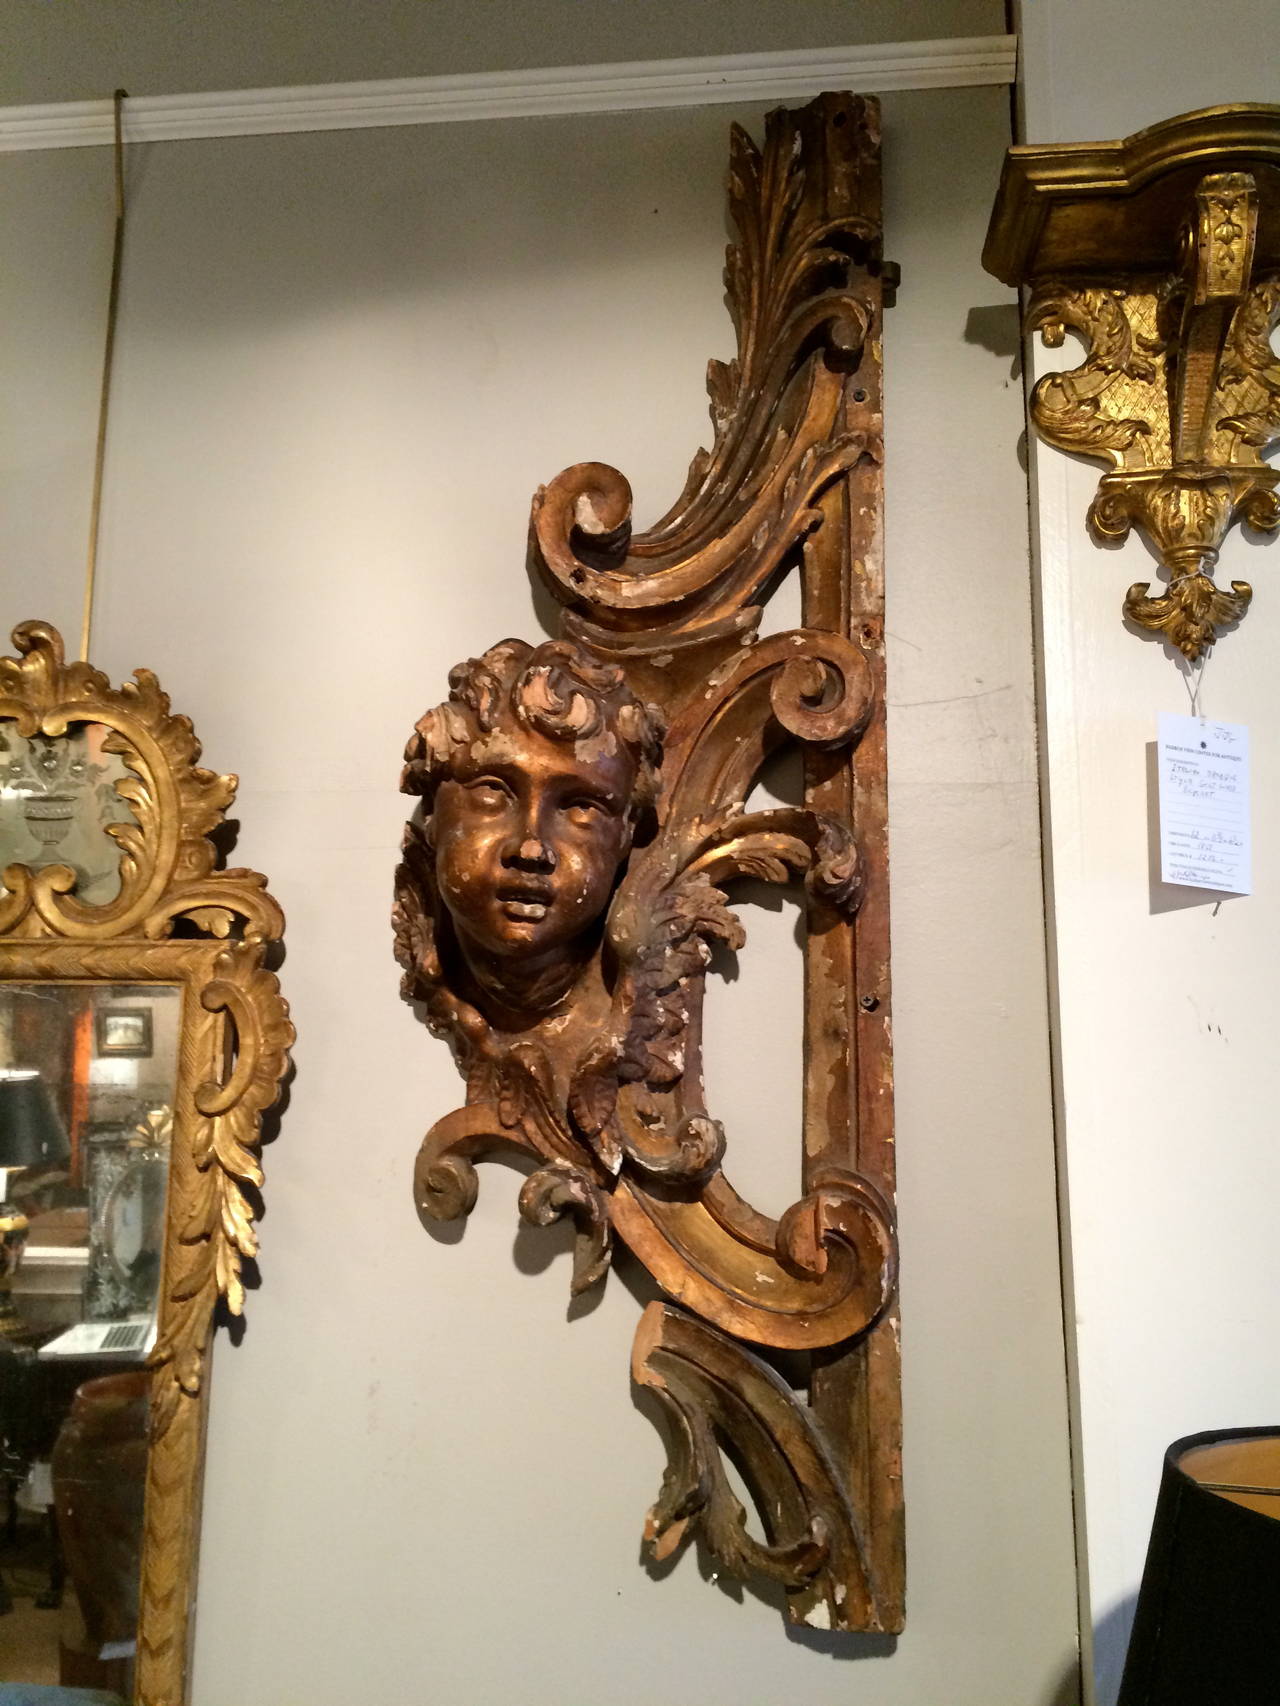 Excellent quality large-scale 18th century Florentine giltwood carving of winged putto, his head shown in high relief suspended in arabesques. An architectural fragment, possibly from an elaborate choir screen.